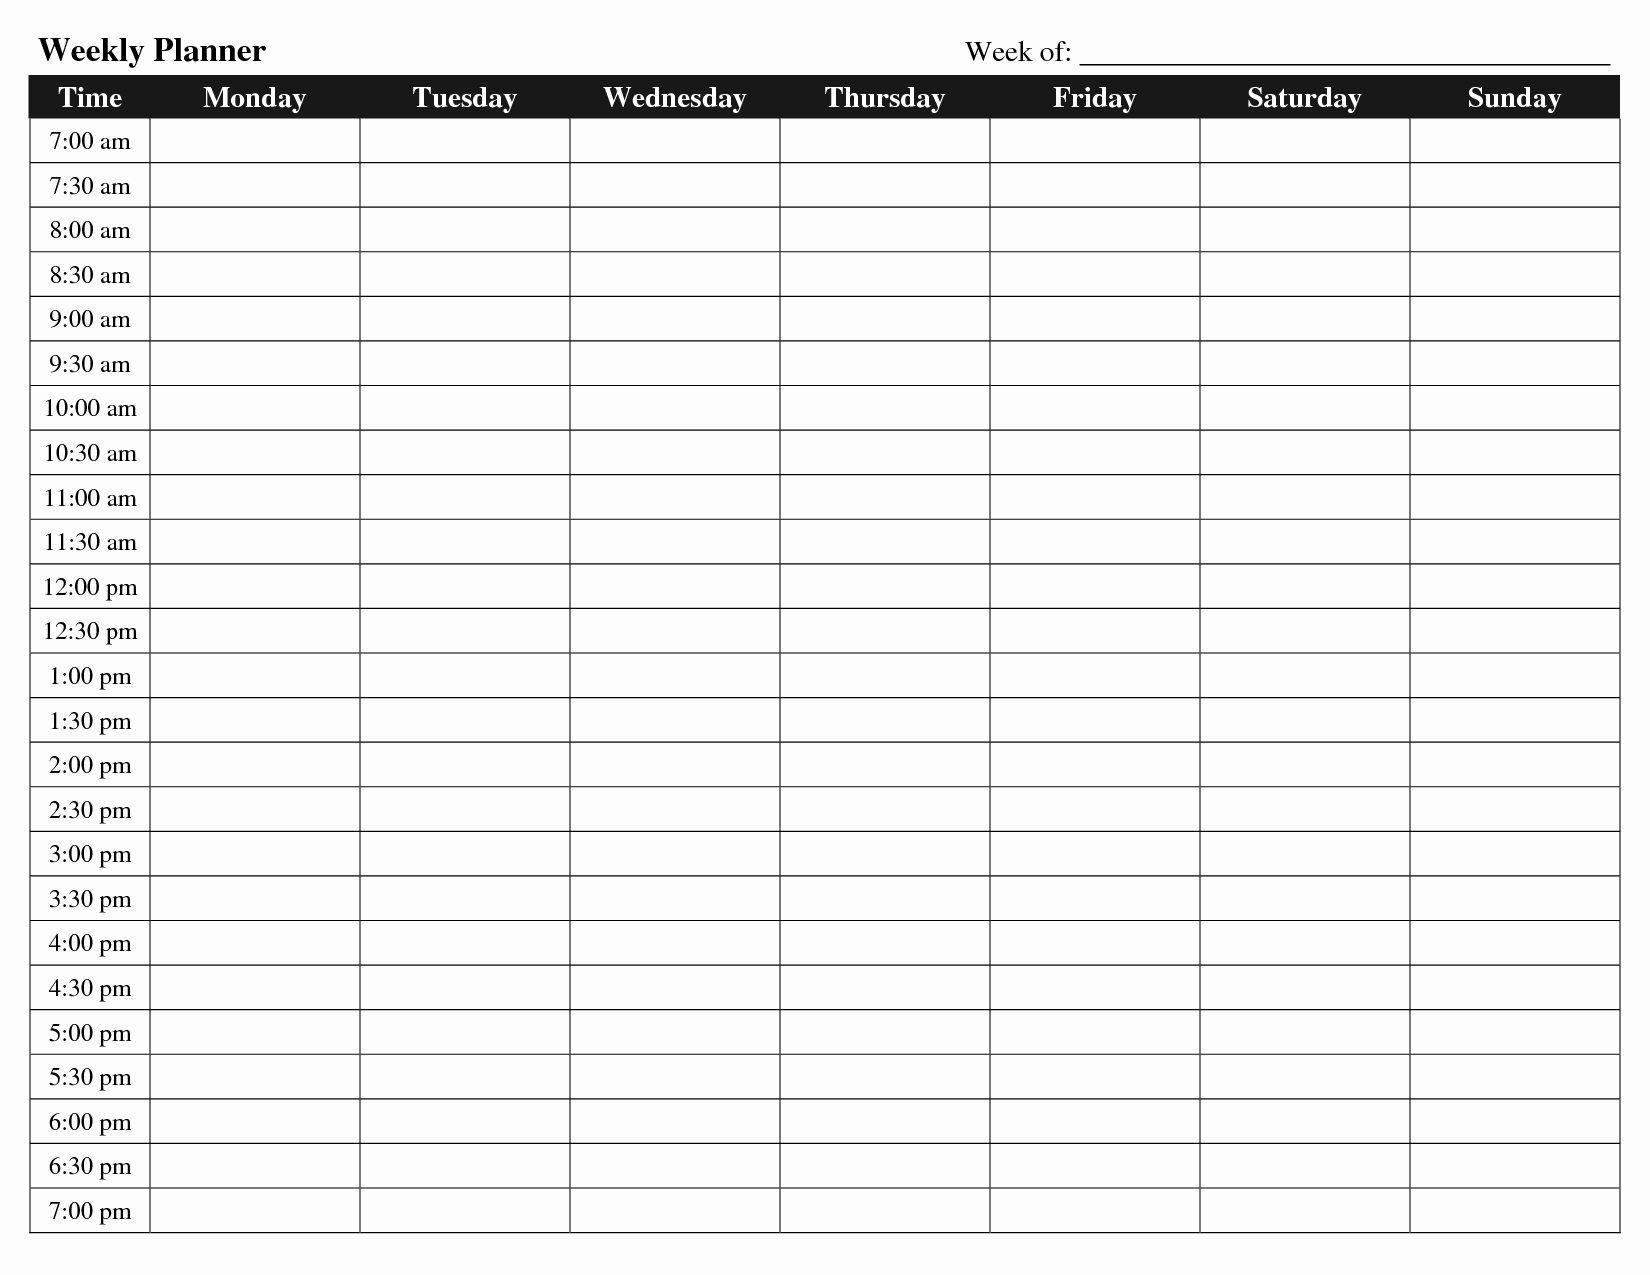 Weekly Schedule Template Ideas Calendar With Time Slots Free | Smorad in Blank Weekly Schedule With Time Slots